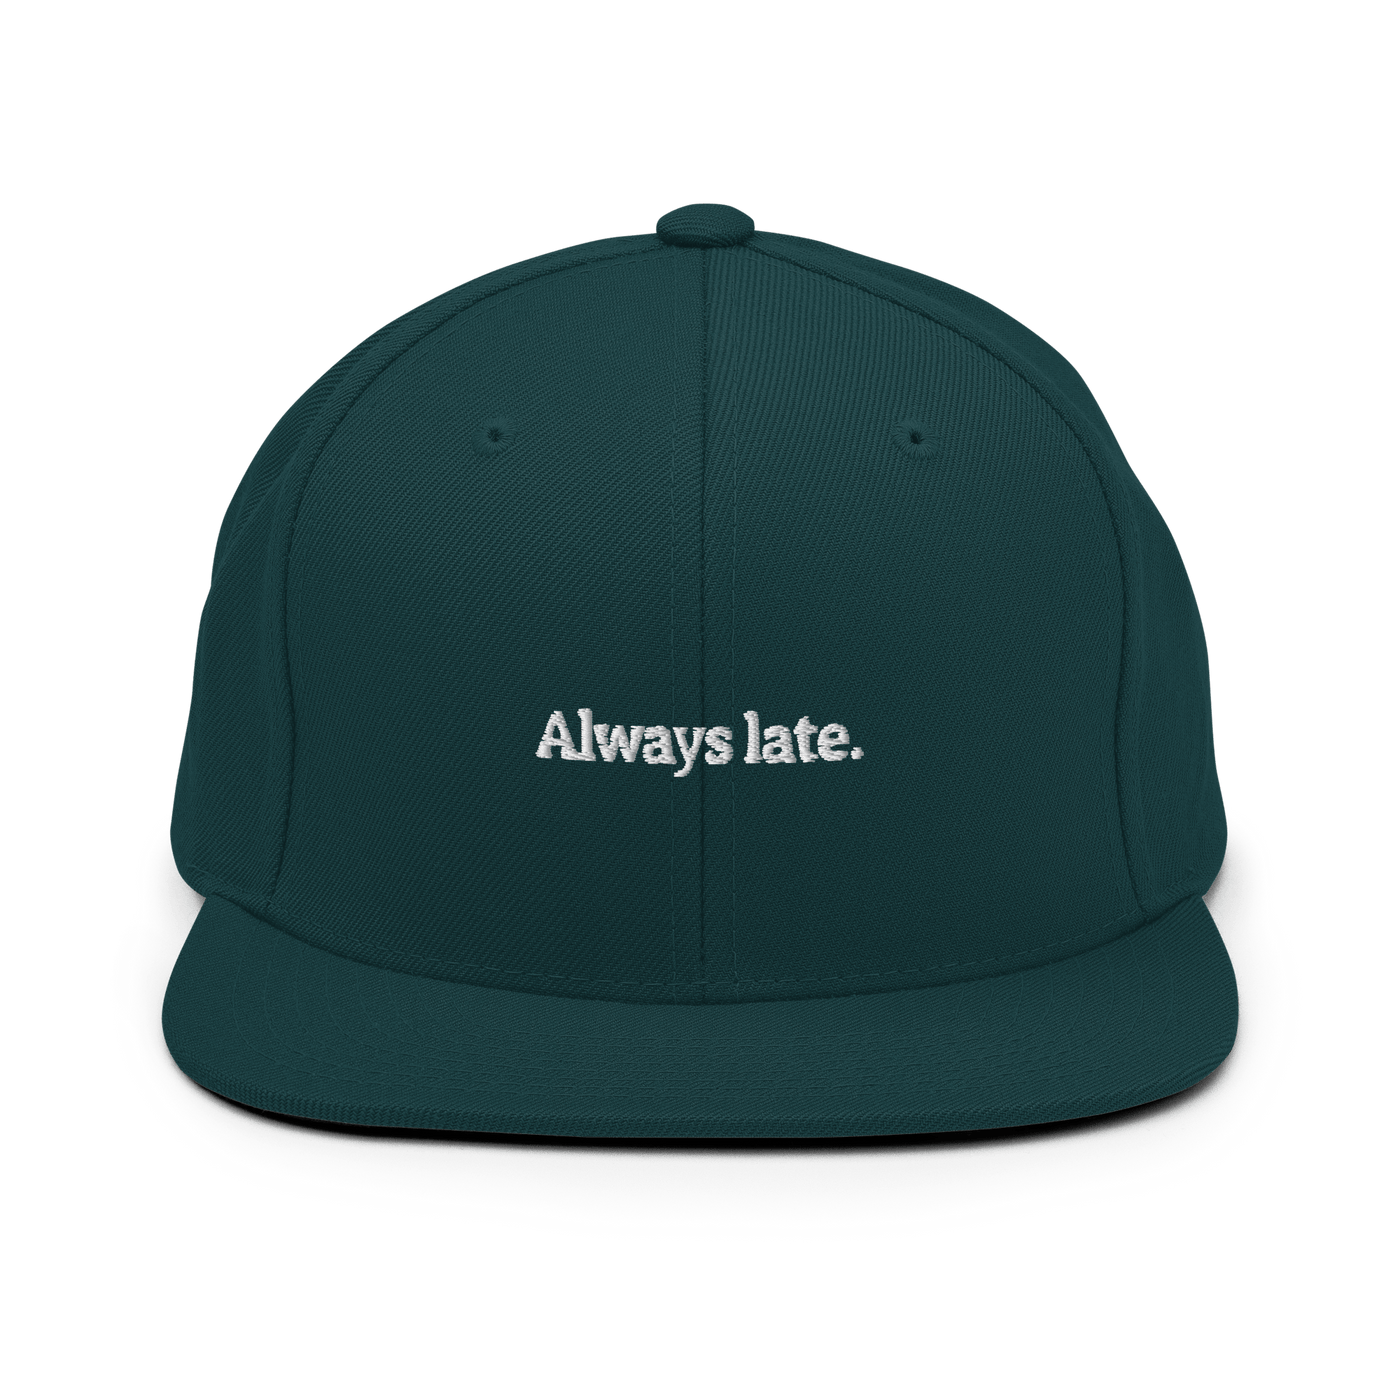 Always Late. Snapback Hat - Spruce - - Just Another Cap Store